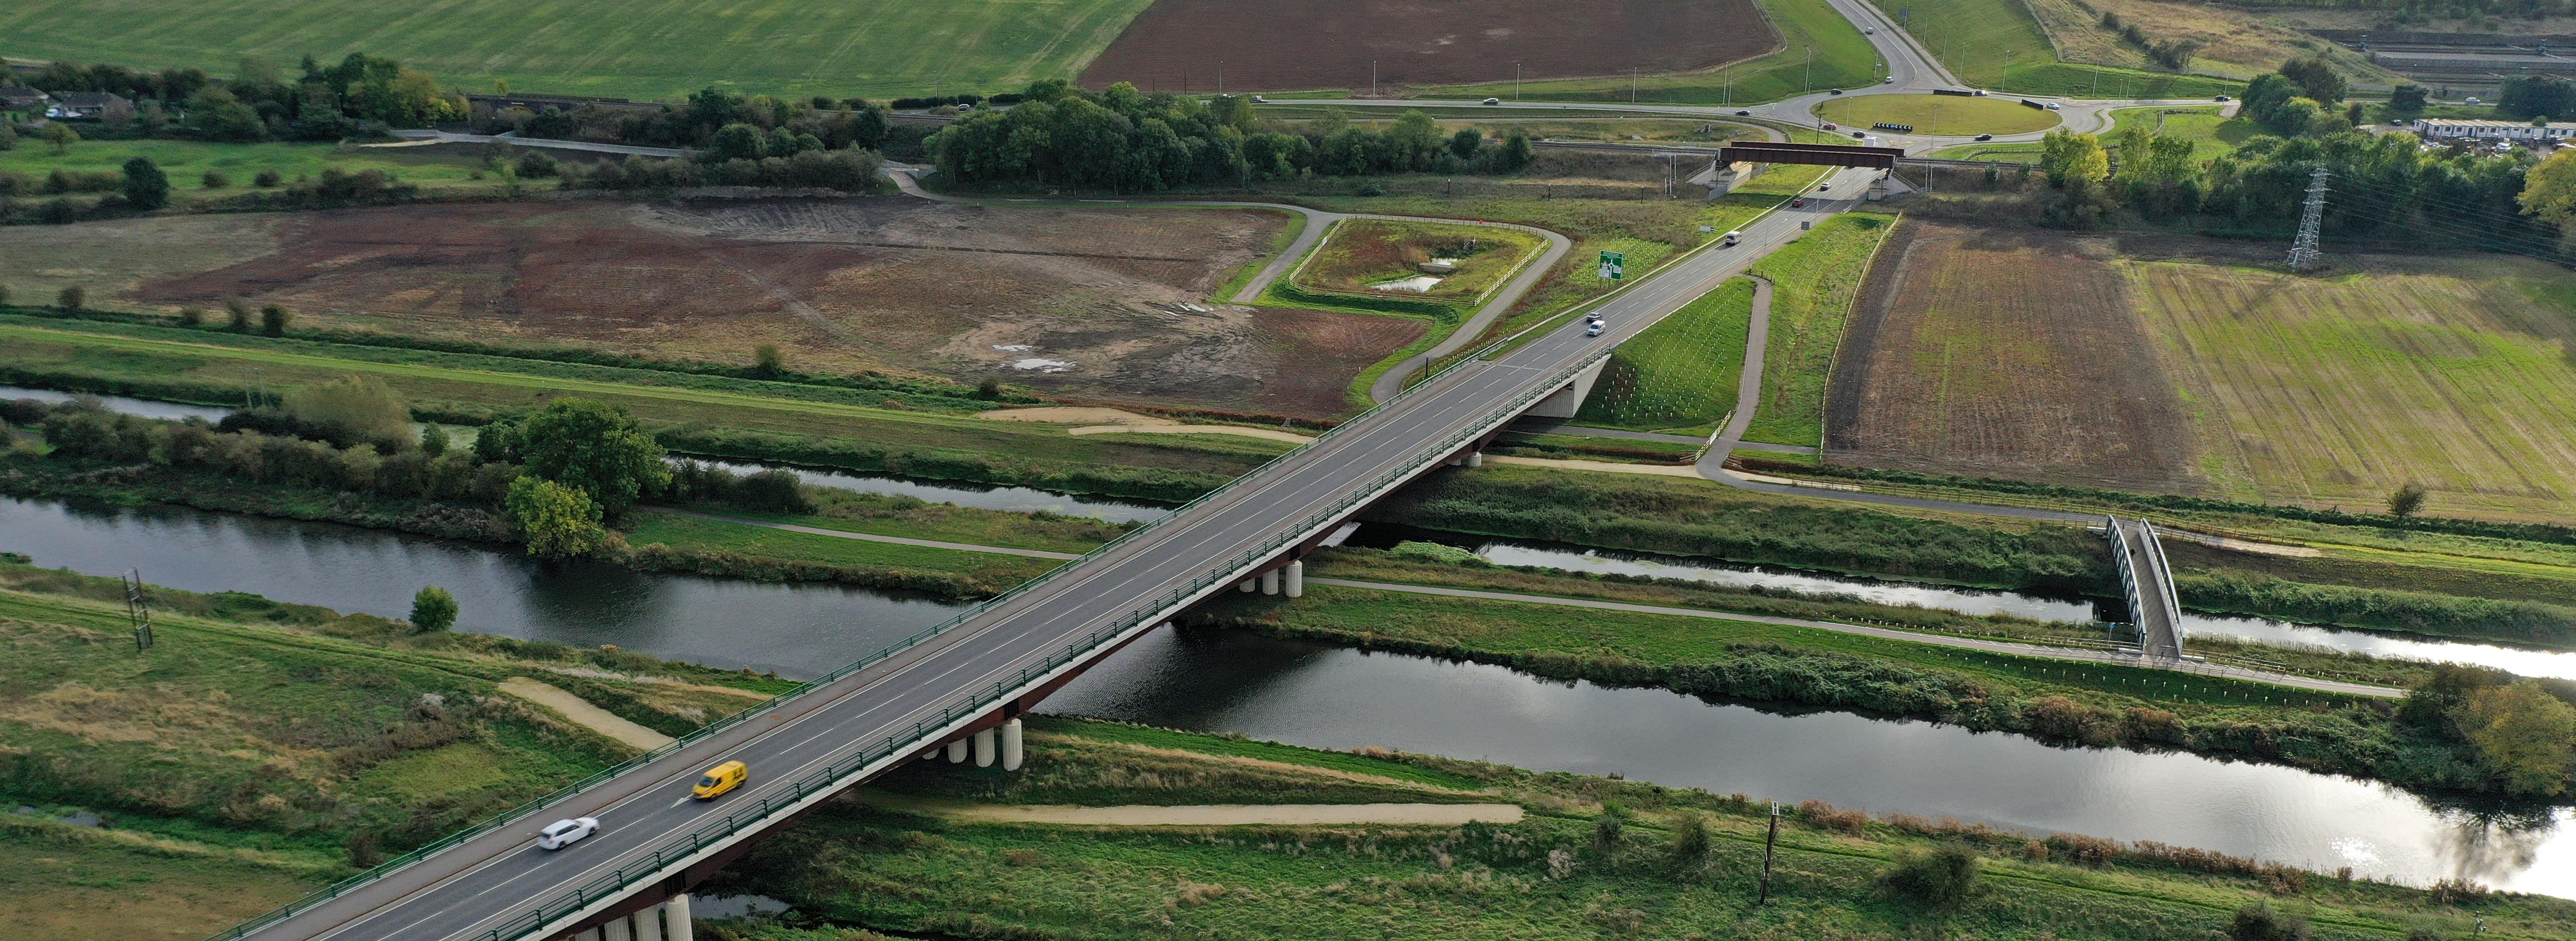 An aerial photograph of part of the Lincoln Eastern Bypass showing a bypass bridge crossing over a river